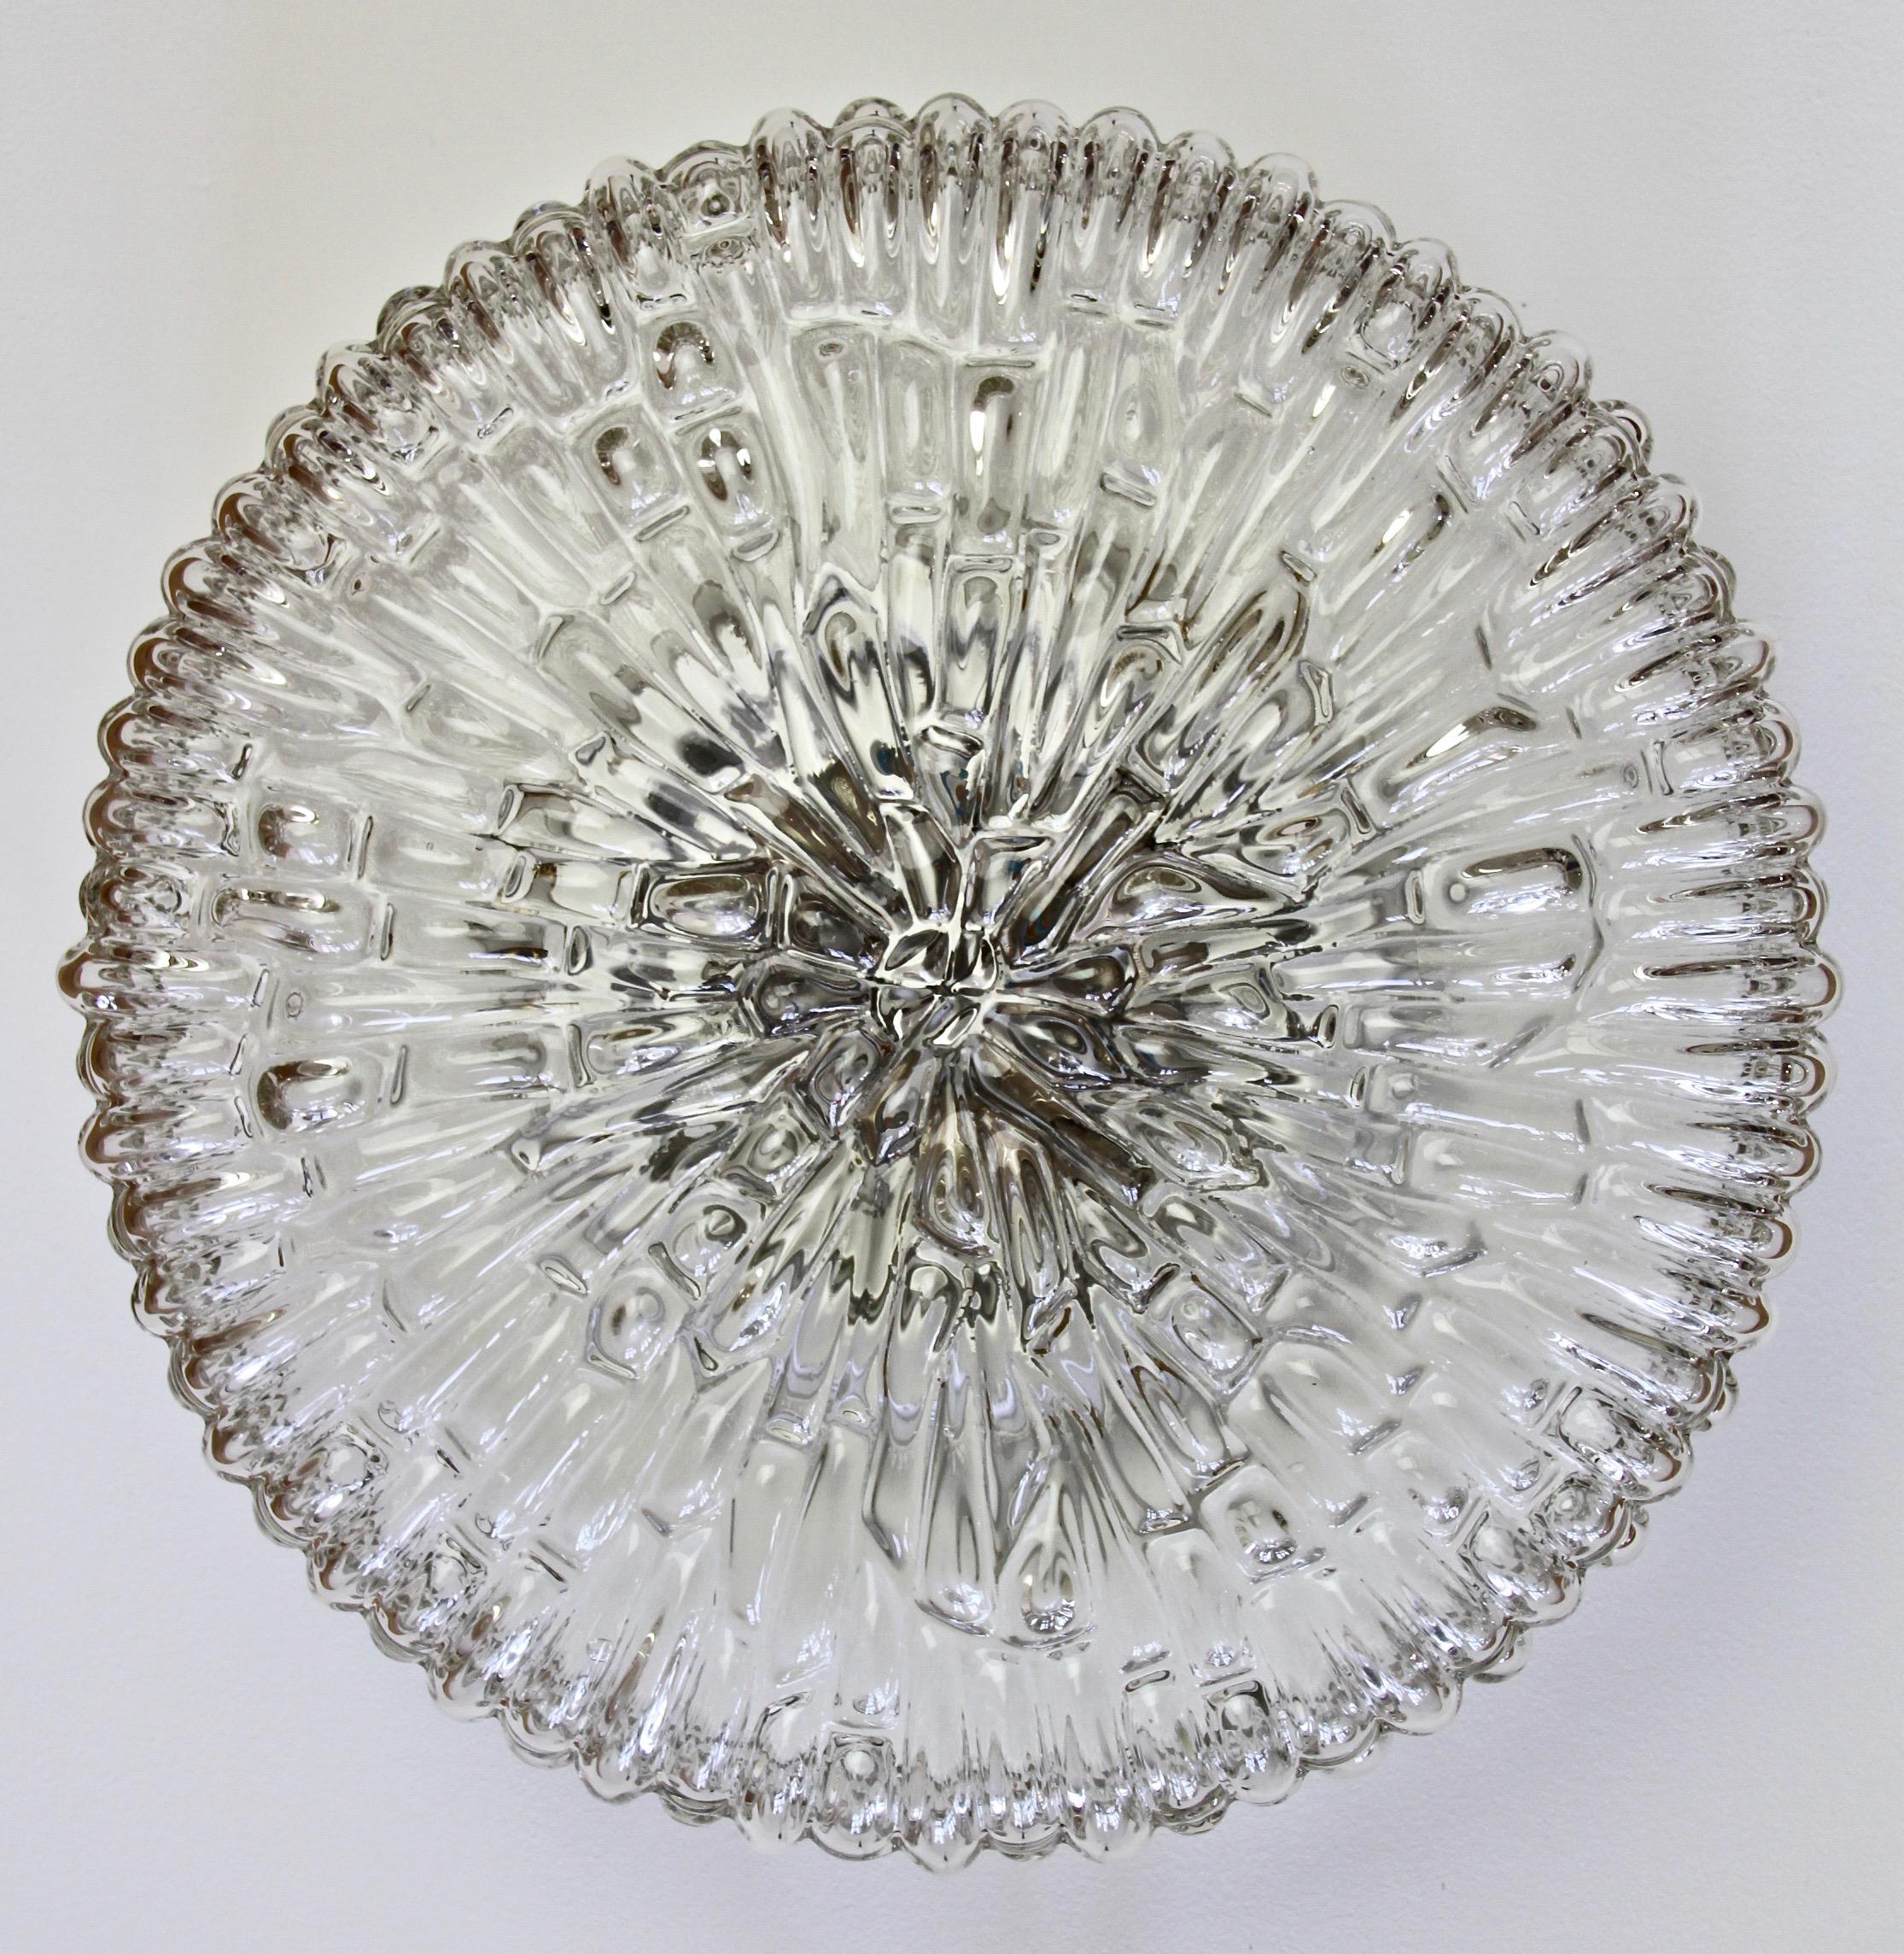 Stunning large 41cm (16 inches) diameter clear glass textured bubble light fixture by Austrian lighting firm Rupert Nikoll. Similar, in style, to the early fixtures of fellow Austrian lighting manufacturer, J.T. Kalmar. Also similar to works by the